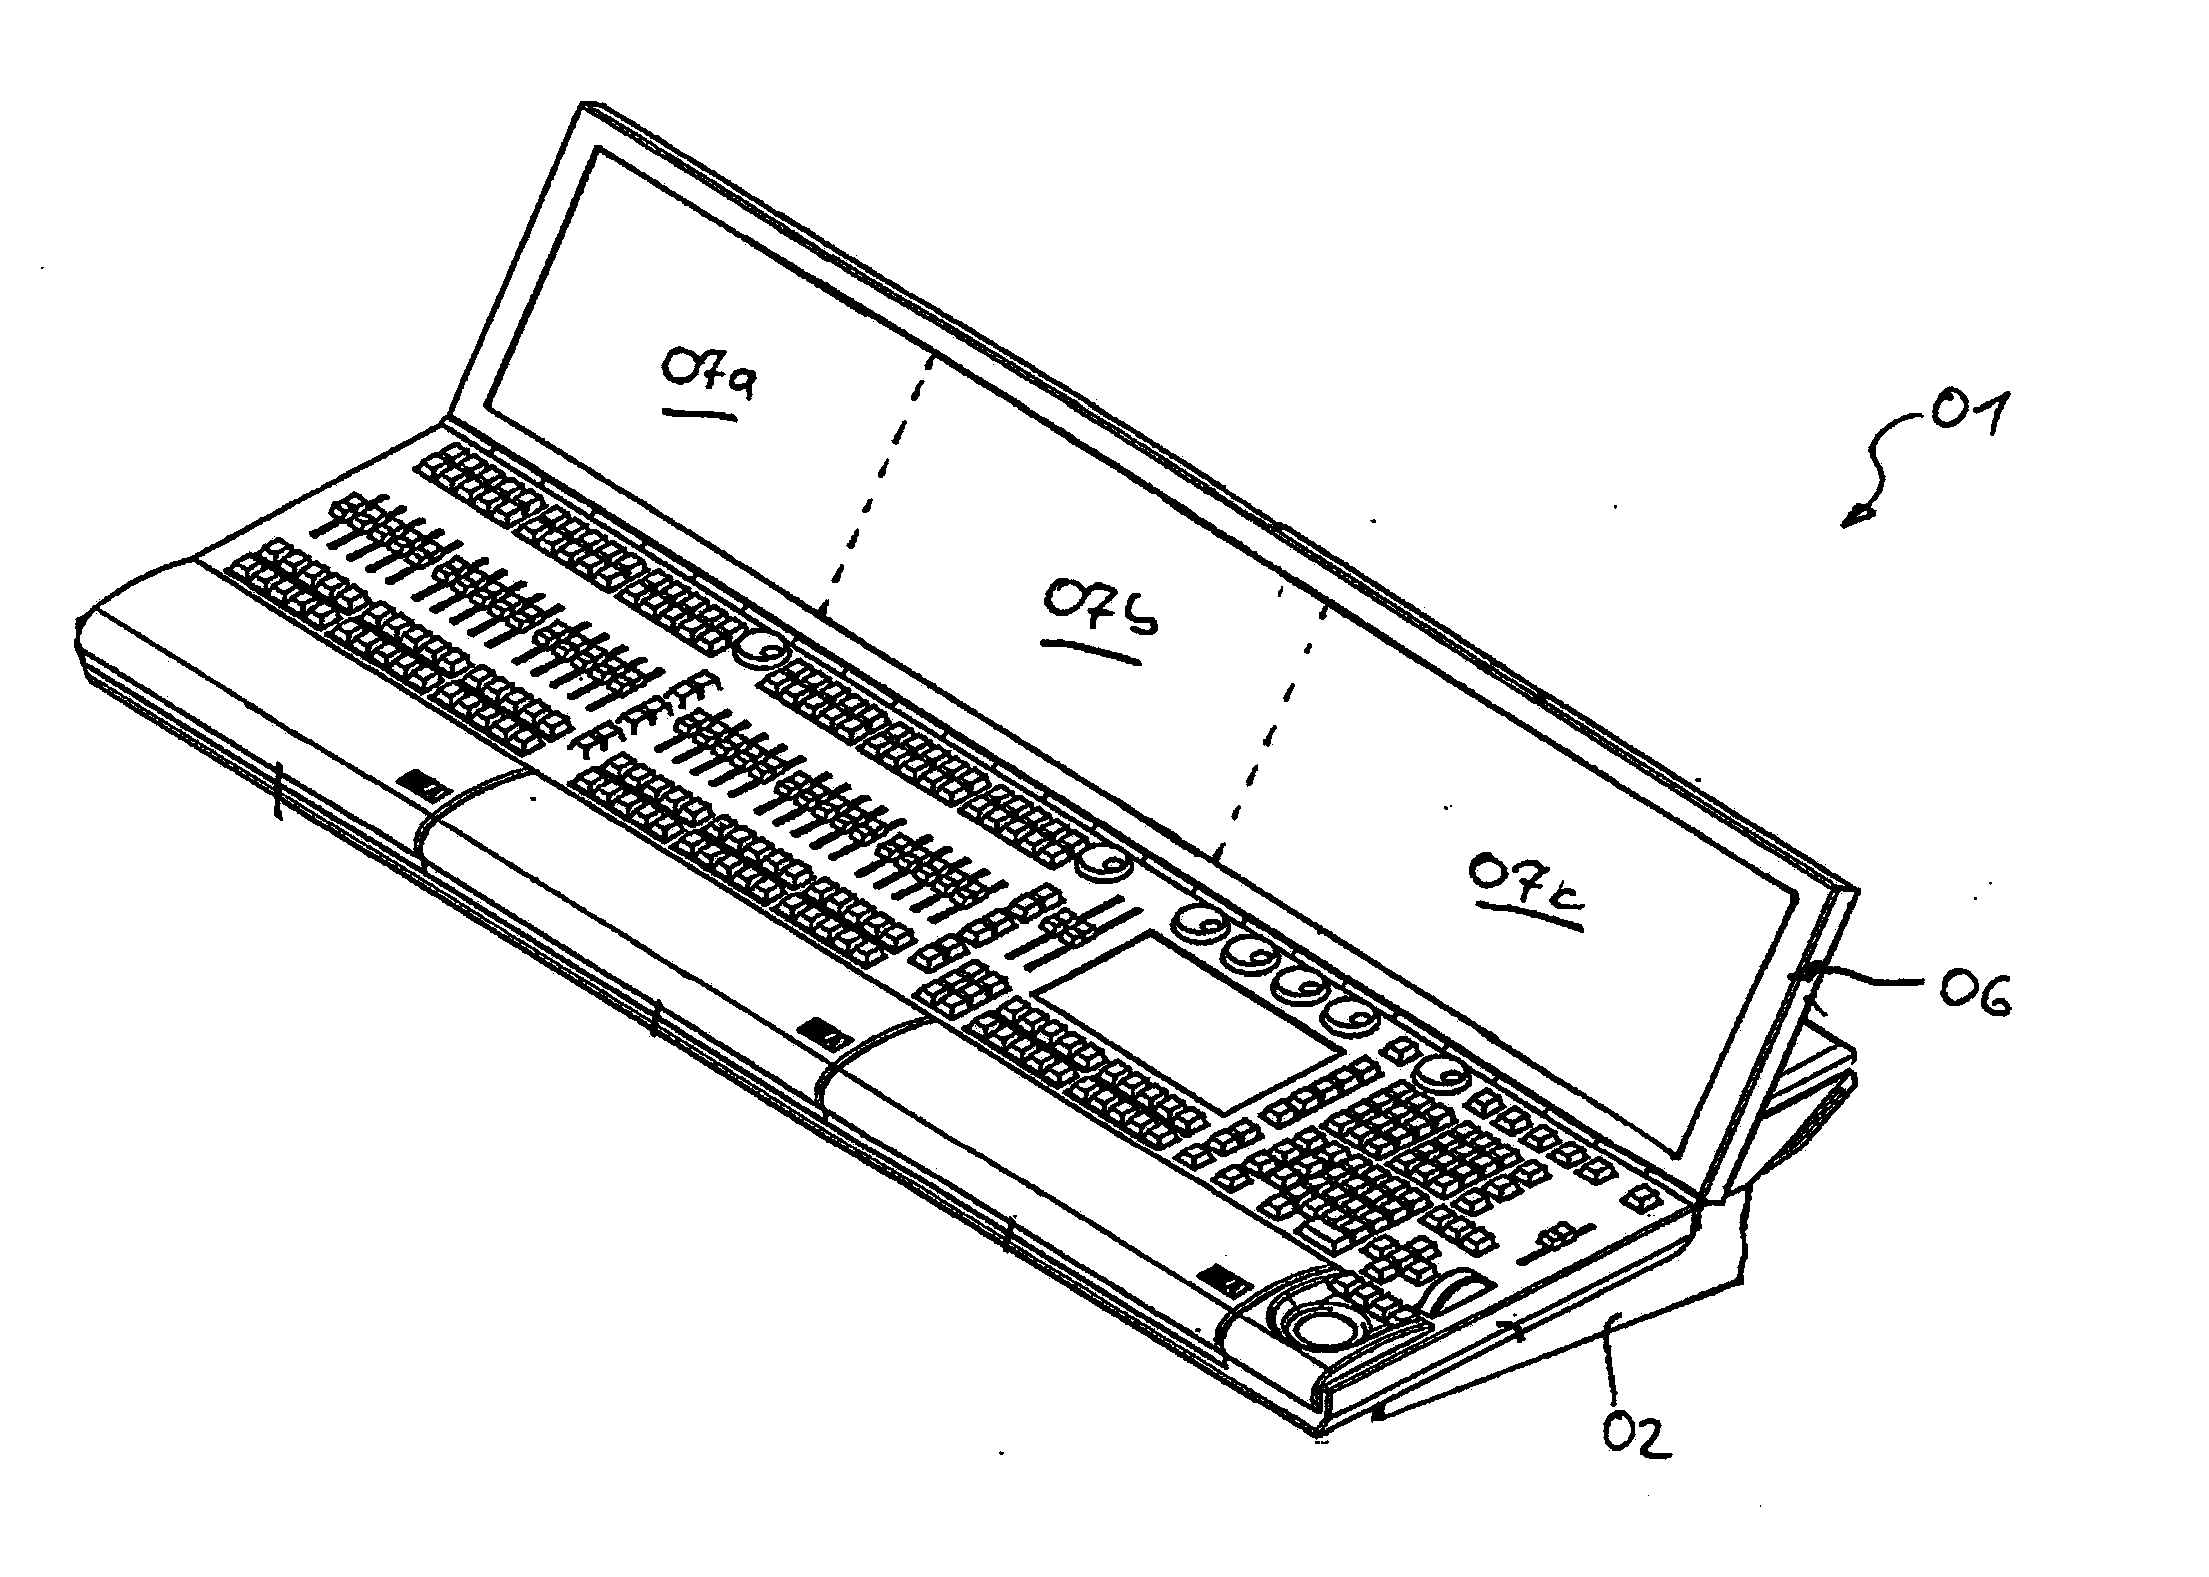 Lighting Control Console For Controlling A Lighting System